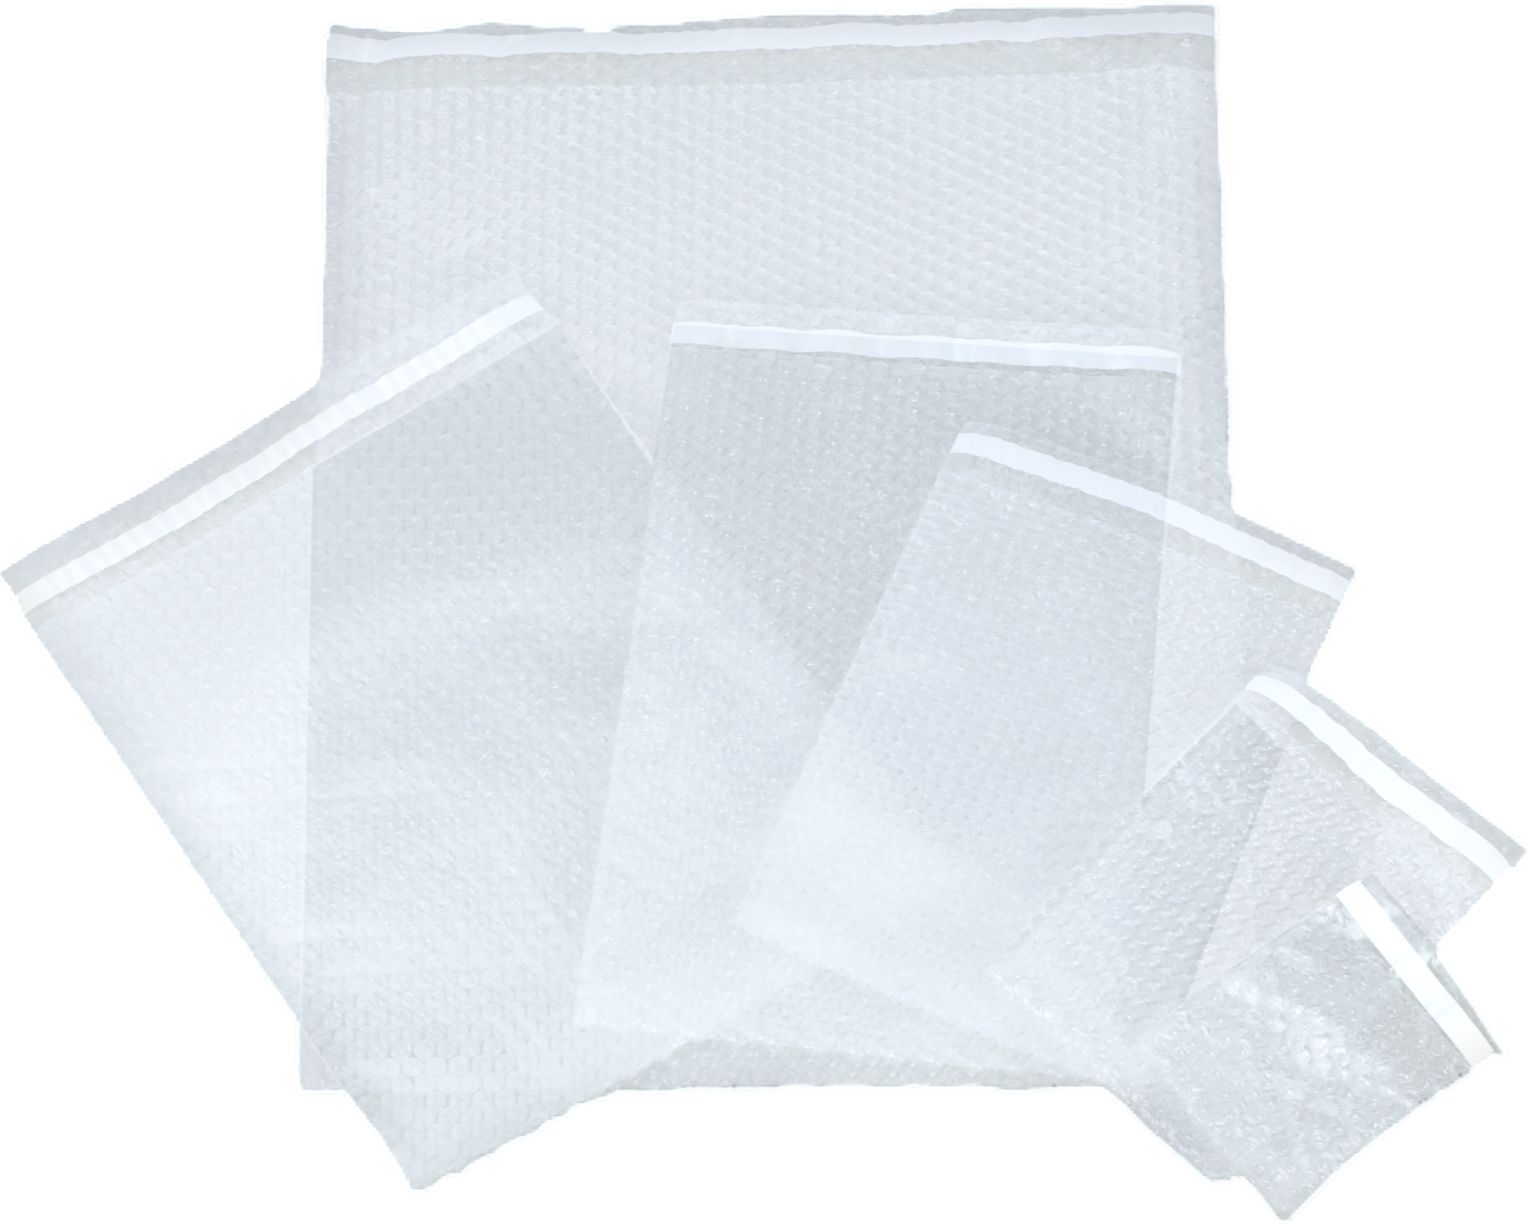 Sealed Air - PKG10431 3/16" x 8" x 18" Bubble Bag With 1" lip Seal & Tape, 250/Cs - 100911295